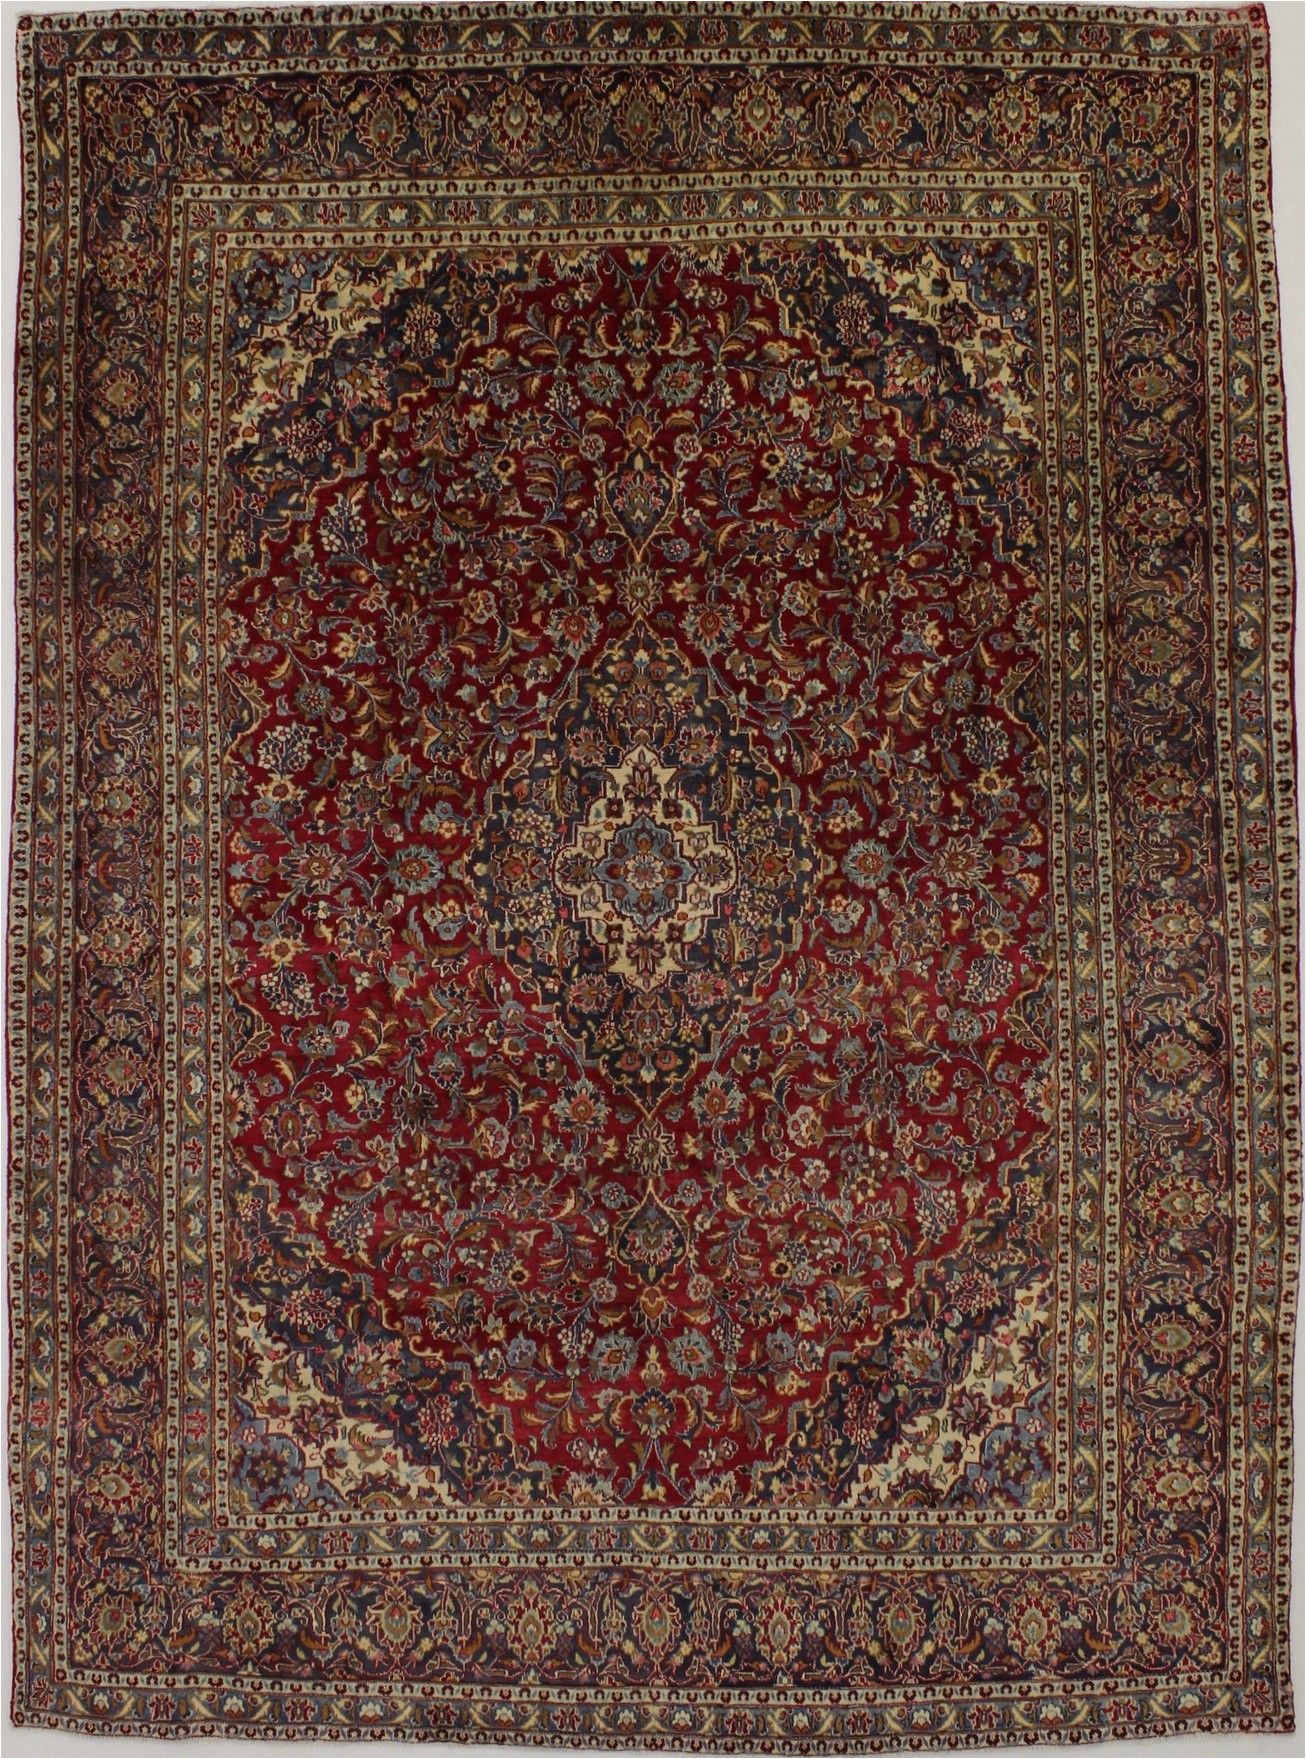 10 X 13 area Rugs Lowes Antique Persian Rugs